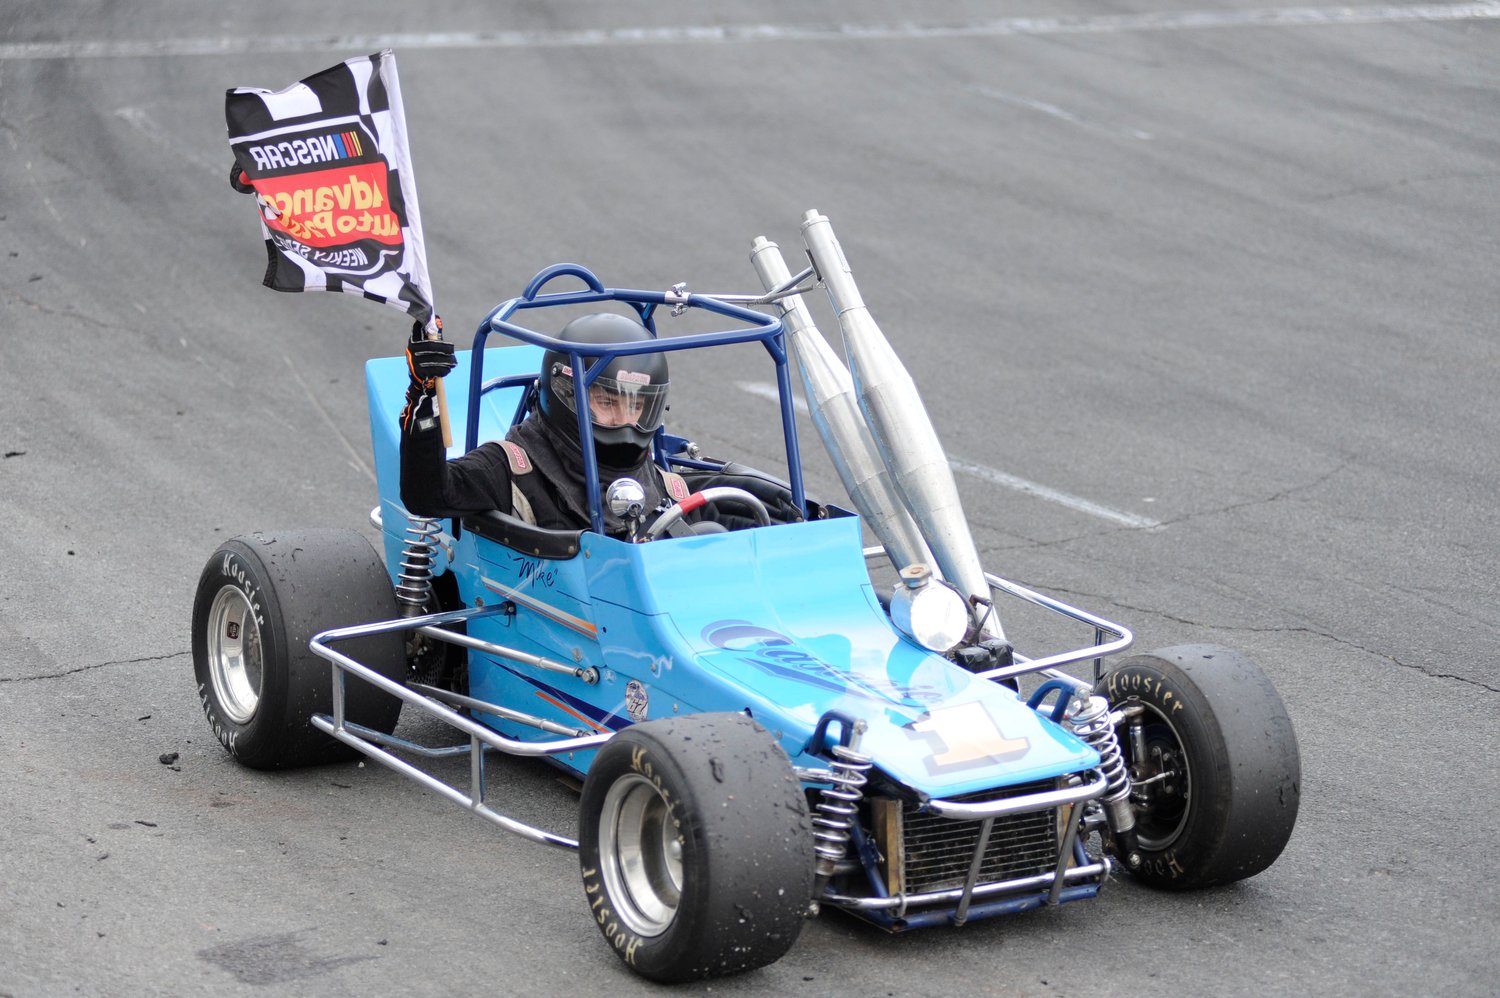 Checkered flag time. Tyler Wagner, the winner of the vintage division, takes a victory lap at the speedway.